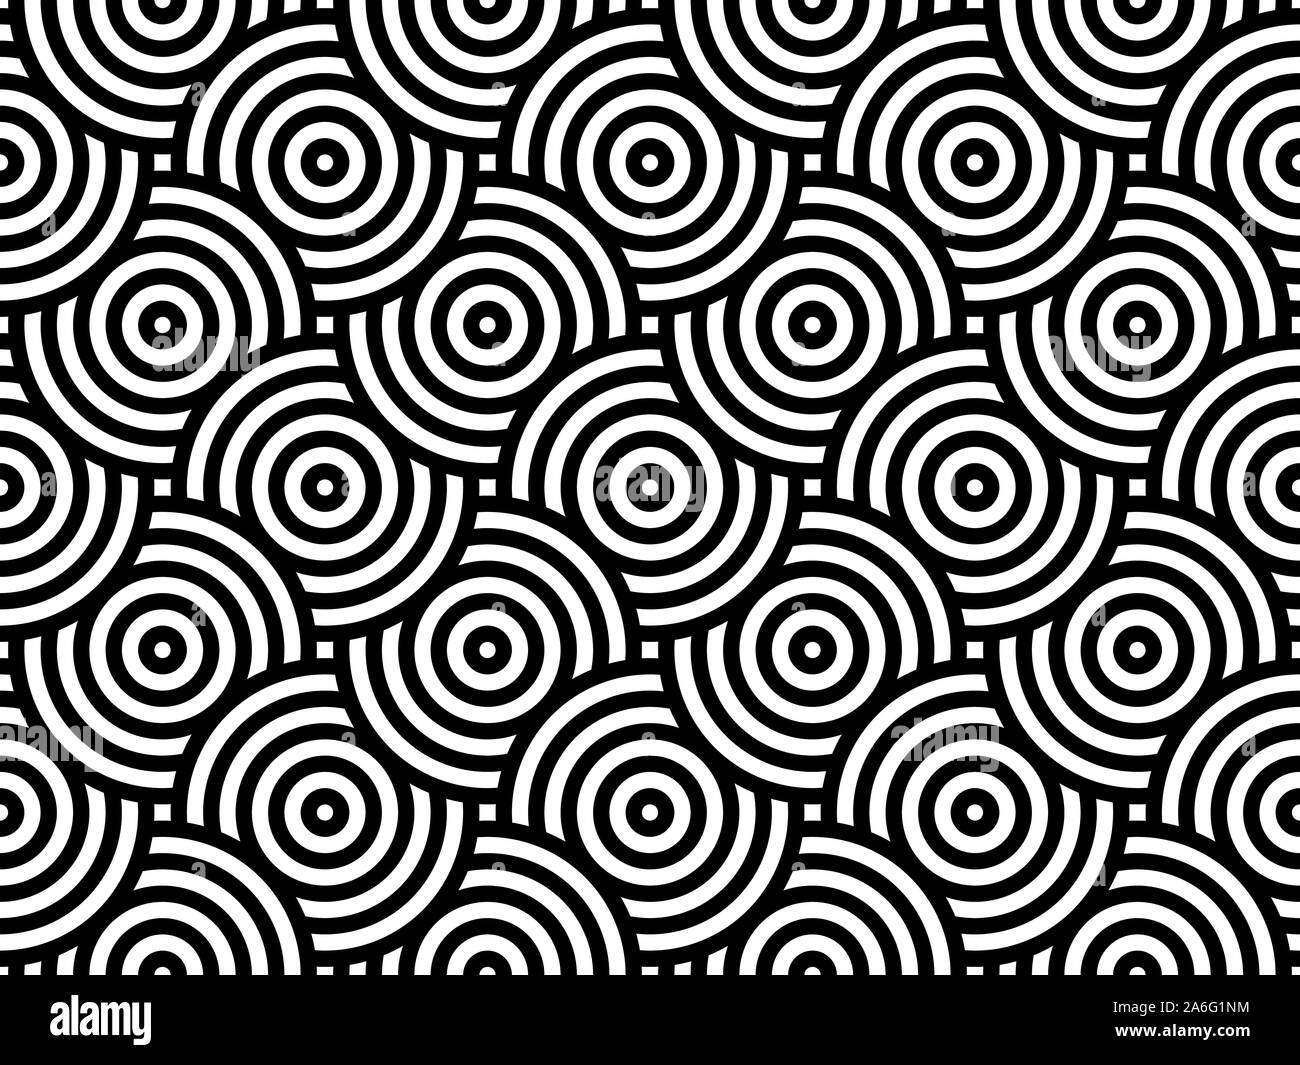 Black and white intersecting repeating circles pattern. Japanese style circles seamless background. Modern spiral abstract geometric wavy pattern. Stock Vector